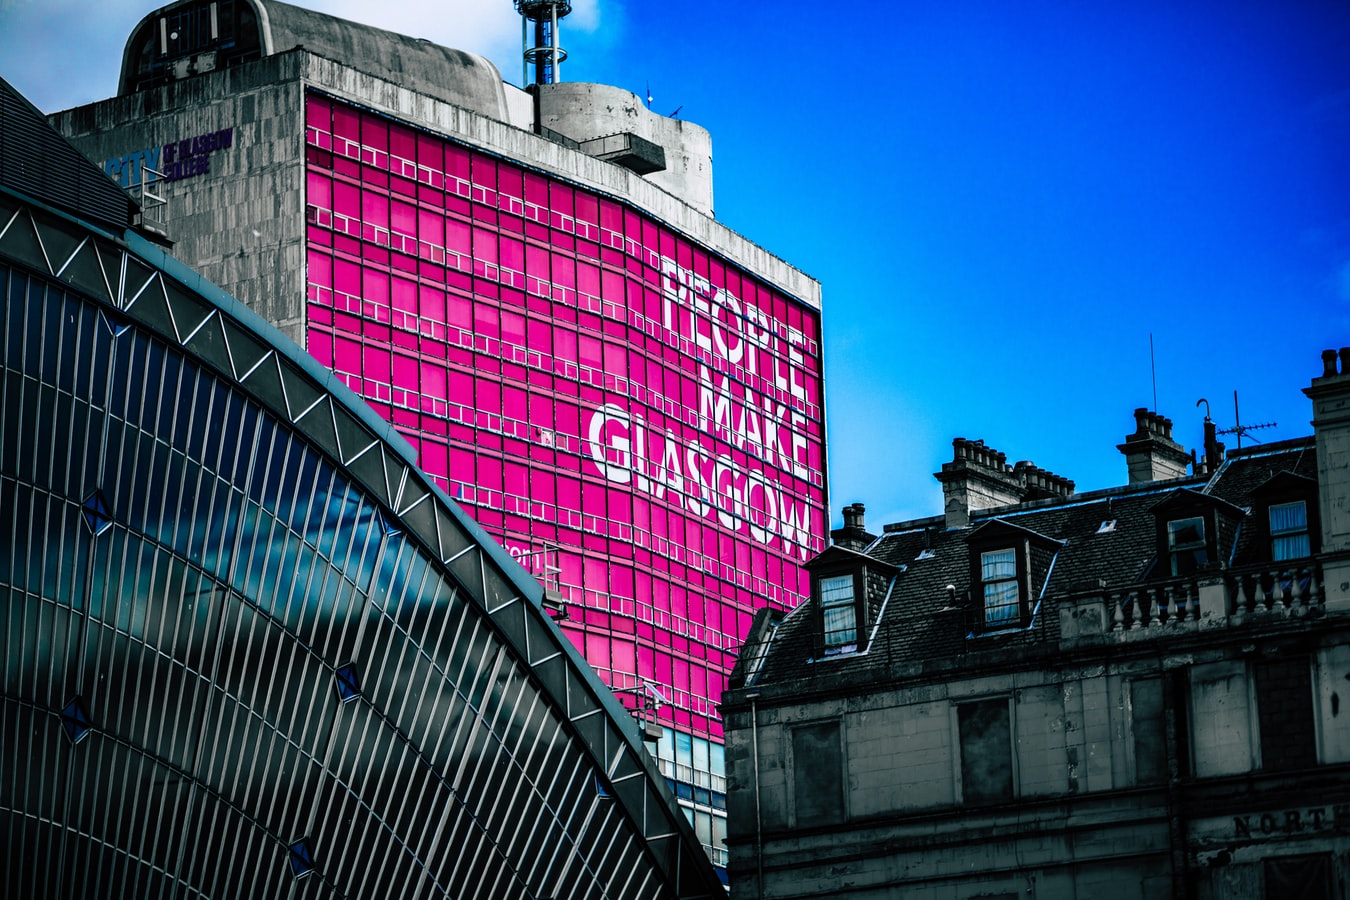 New £7.1 million fund announced to support arts venues and independent museums in Scotland